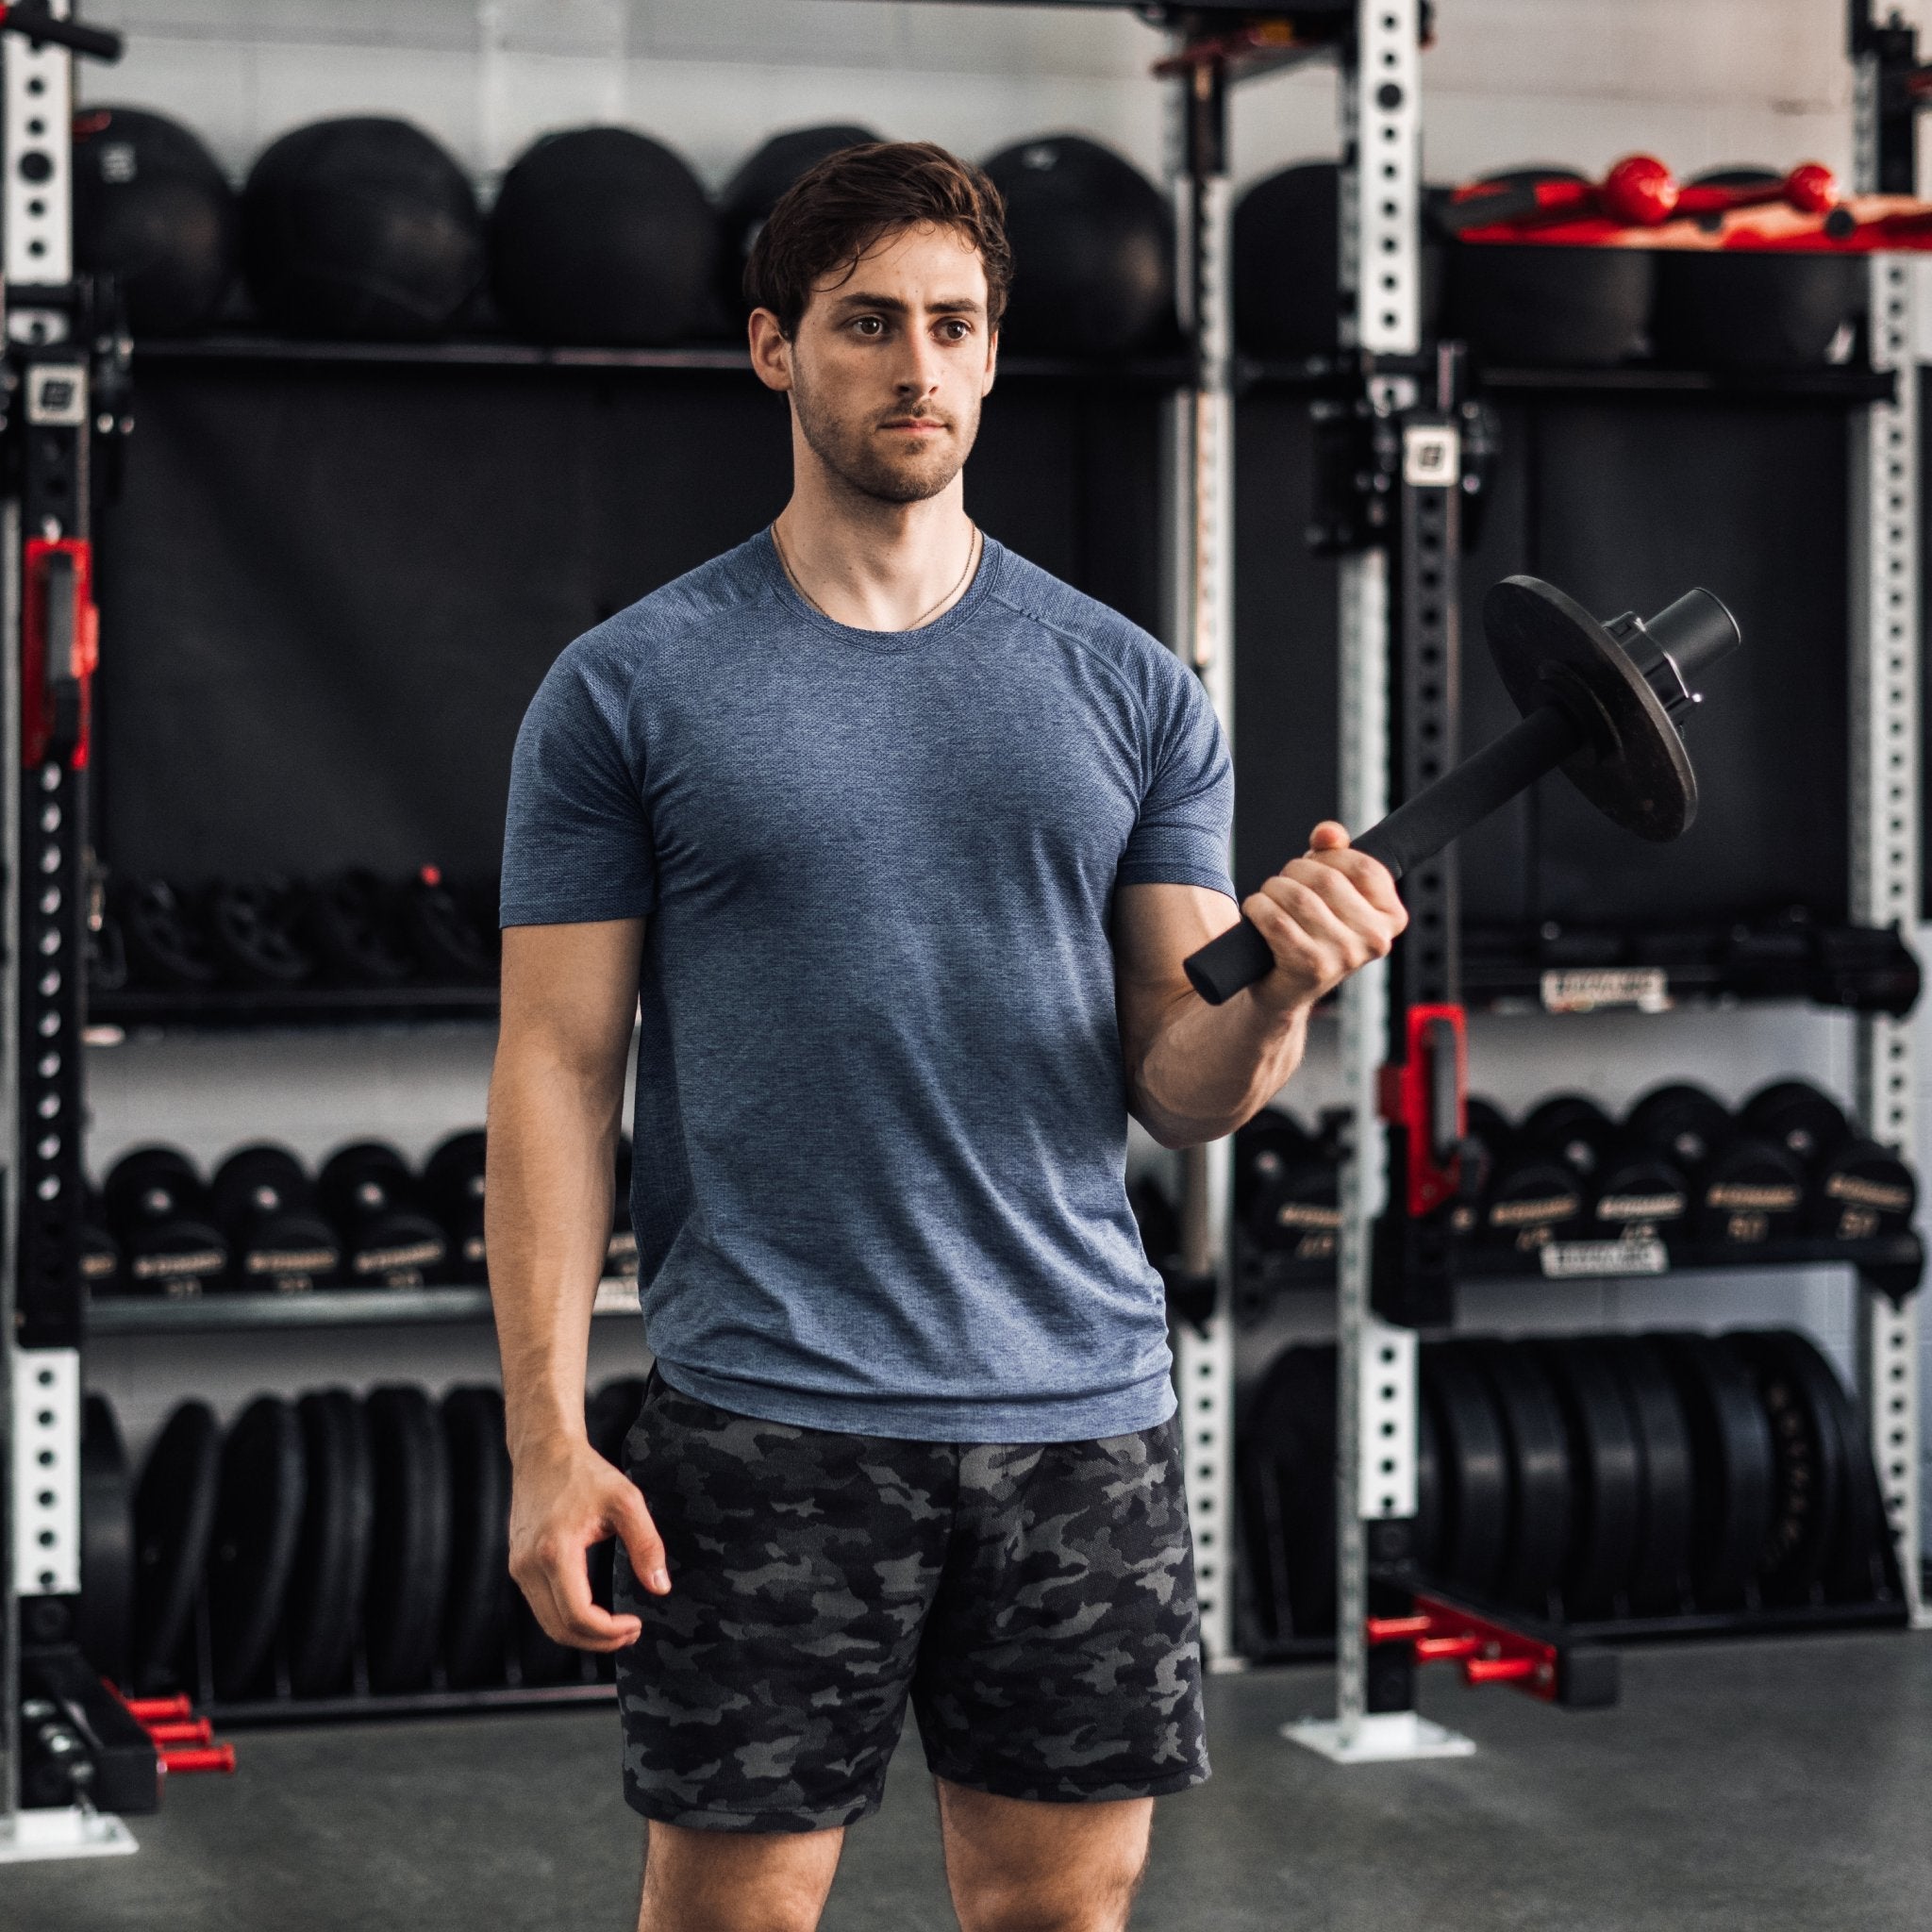 Exercises With The Torque Bar | The Tib Bar Guy